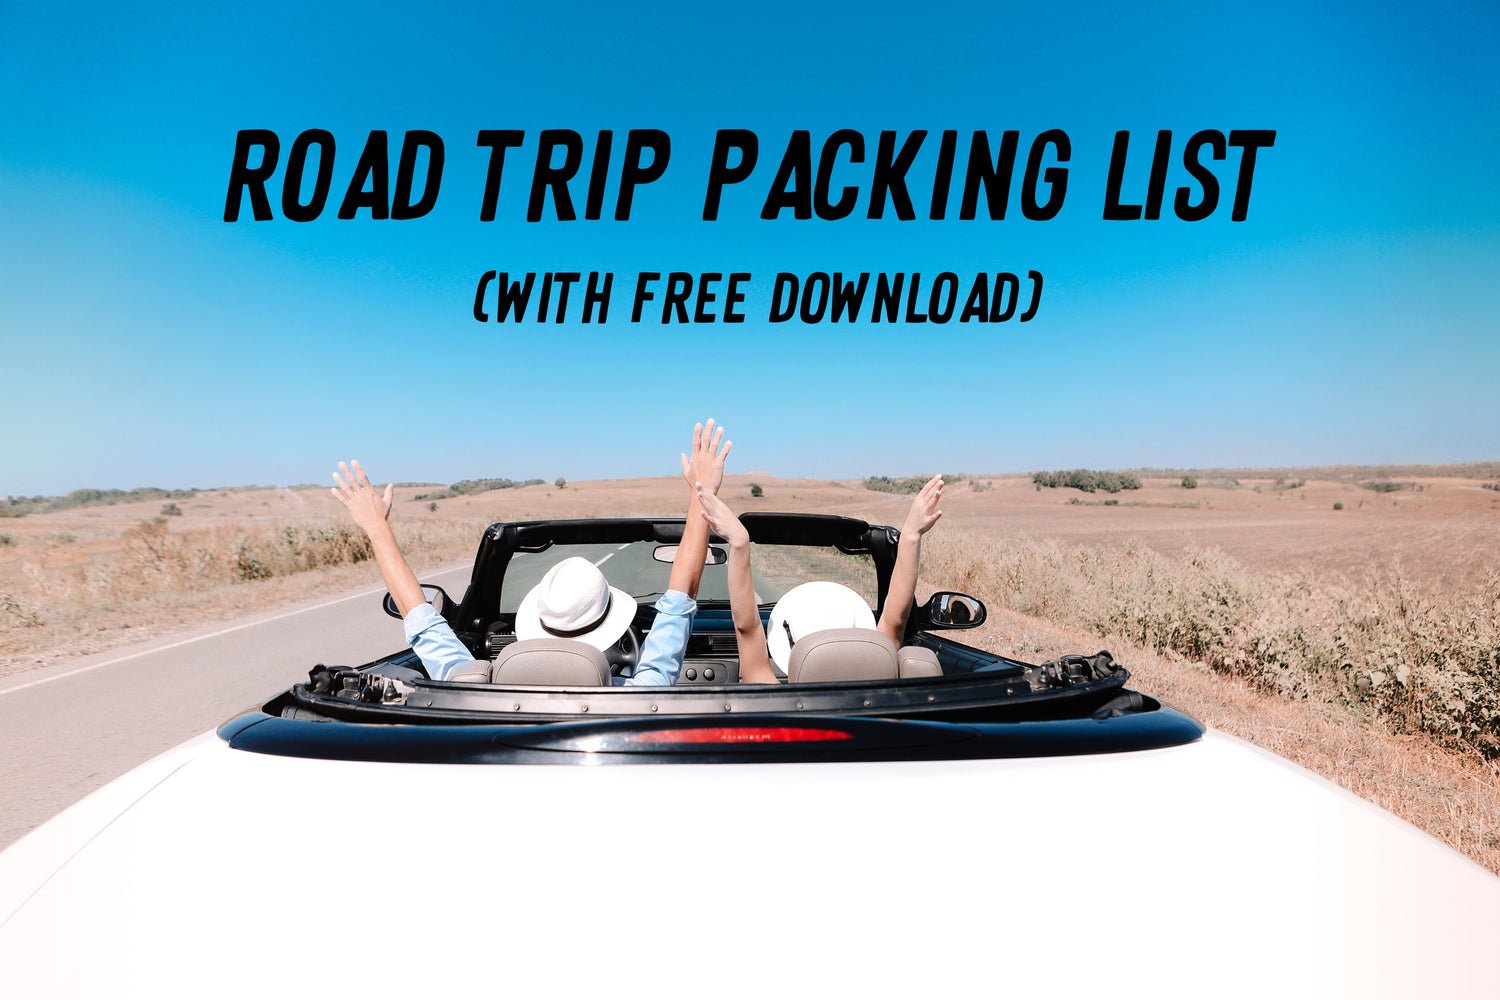 37 Great Must-Have Car Accessories For Your Next Road Trip